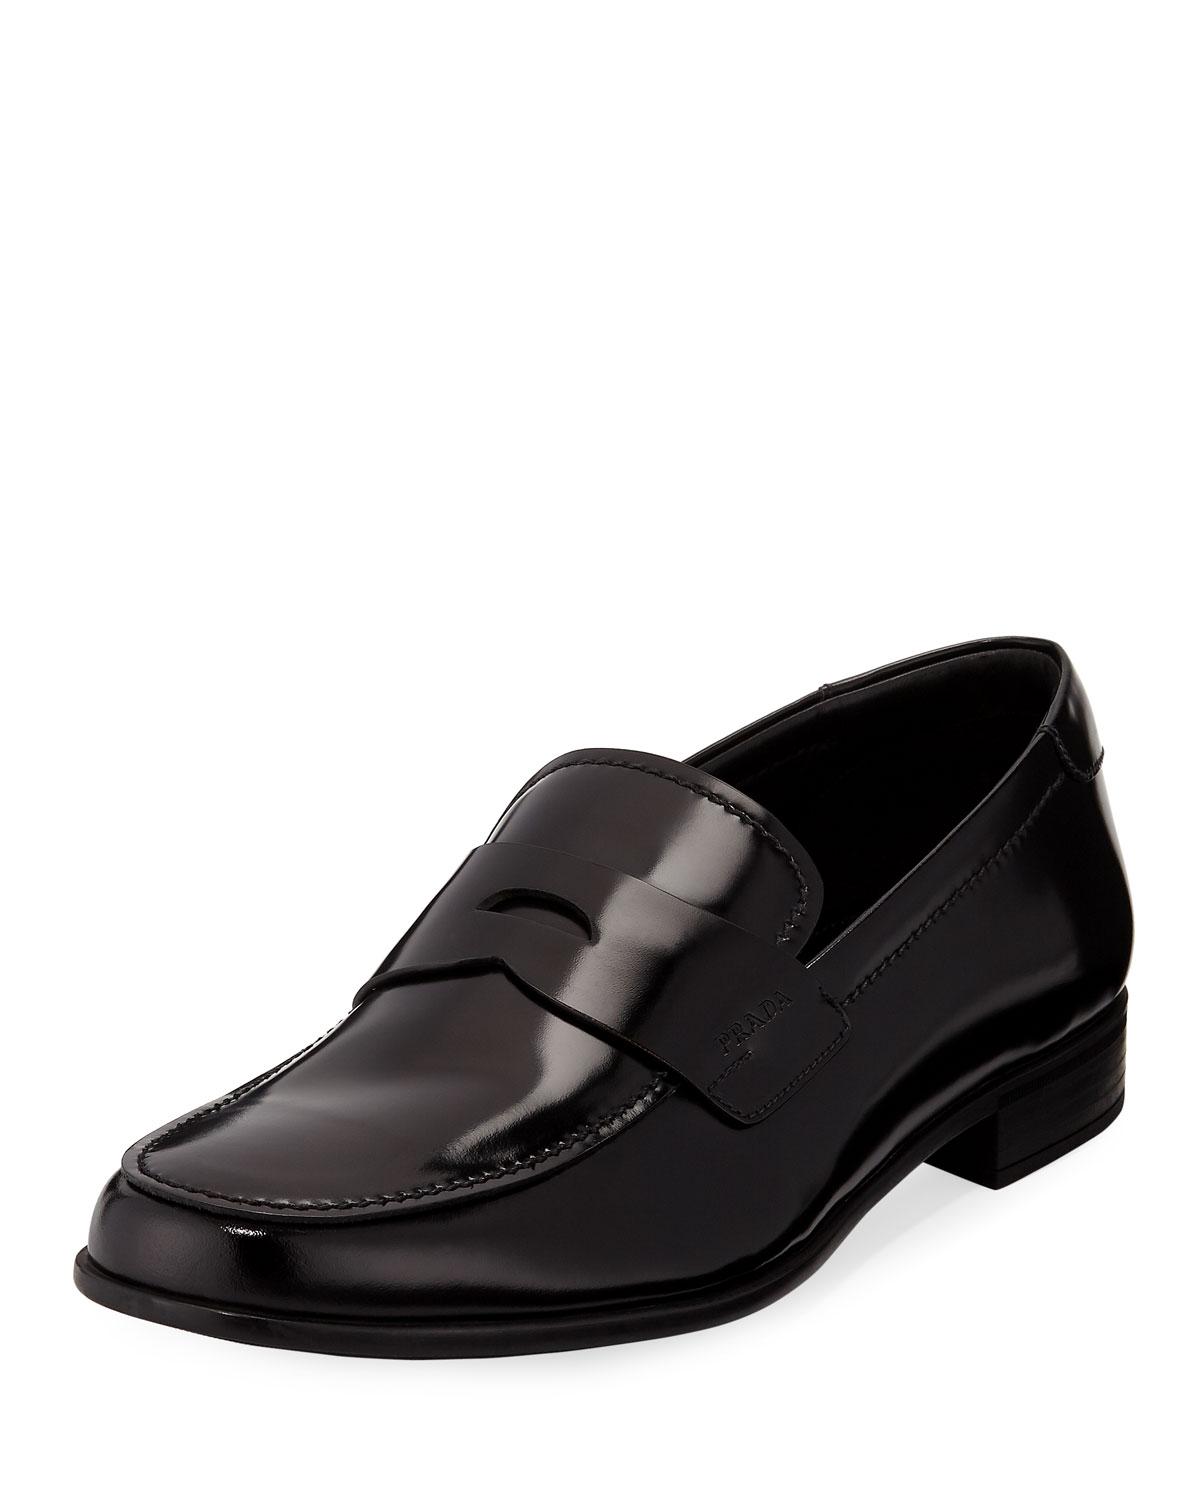 Prada Men's Patent Leather Penny Loafers in Black for Men - Lyst